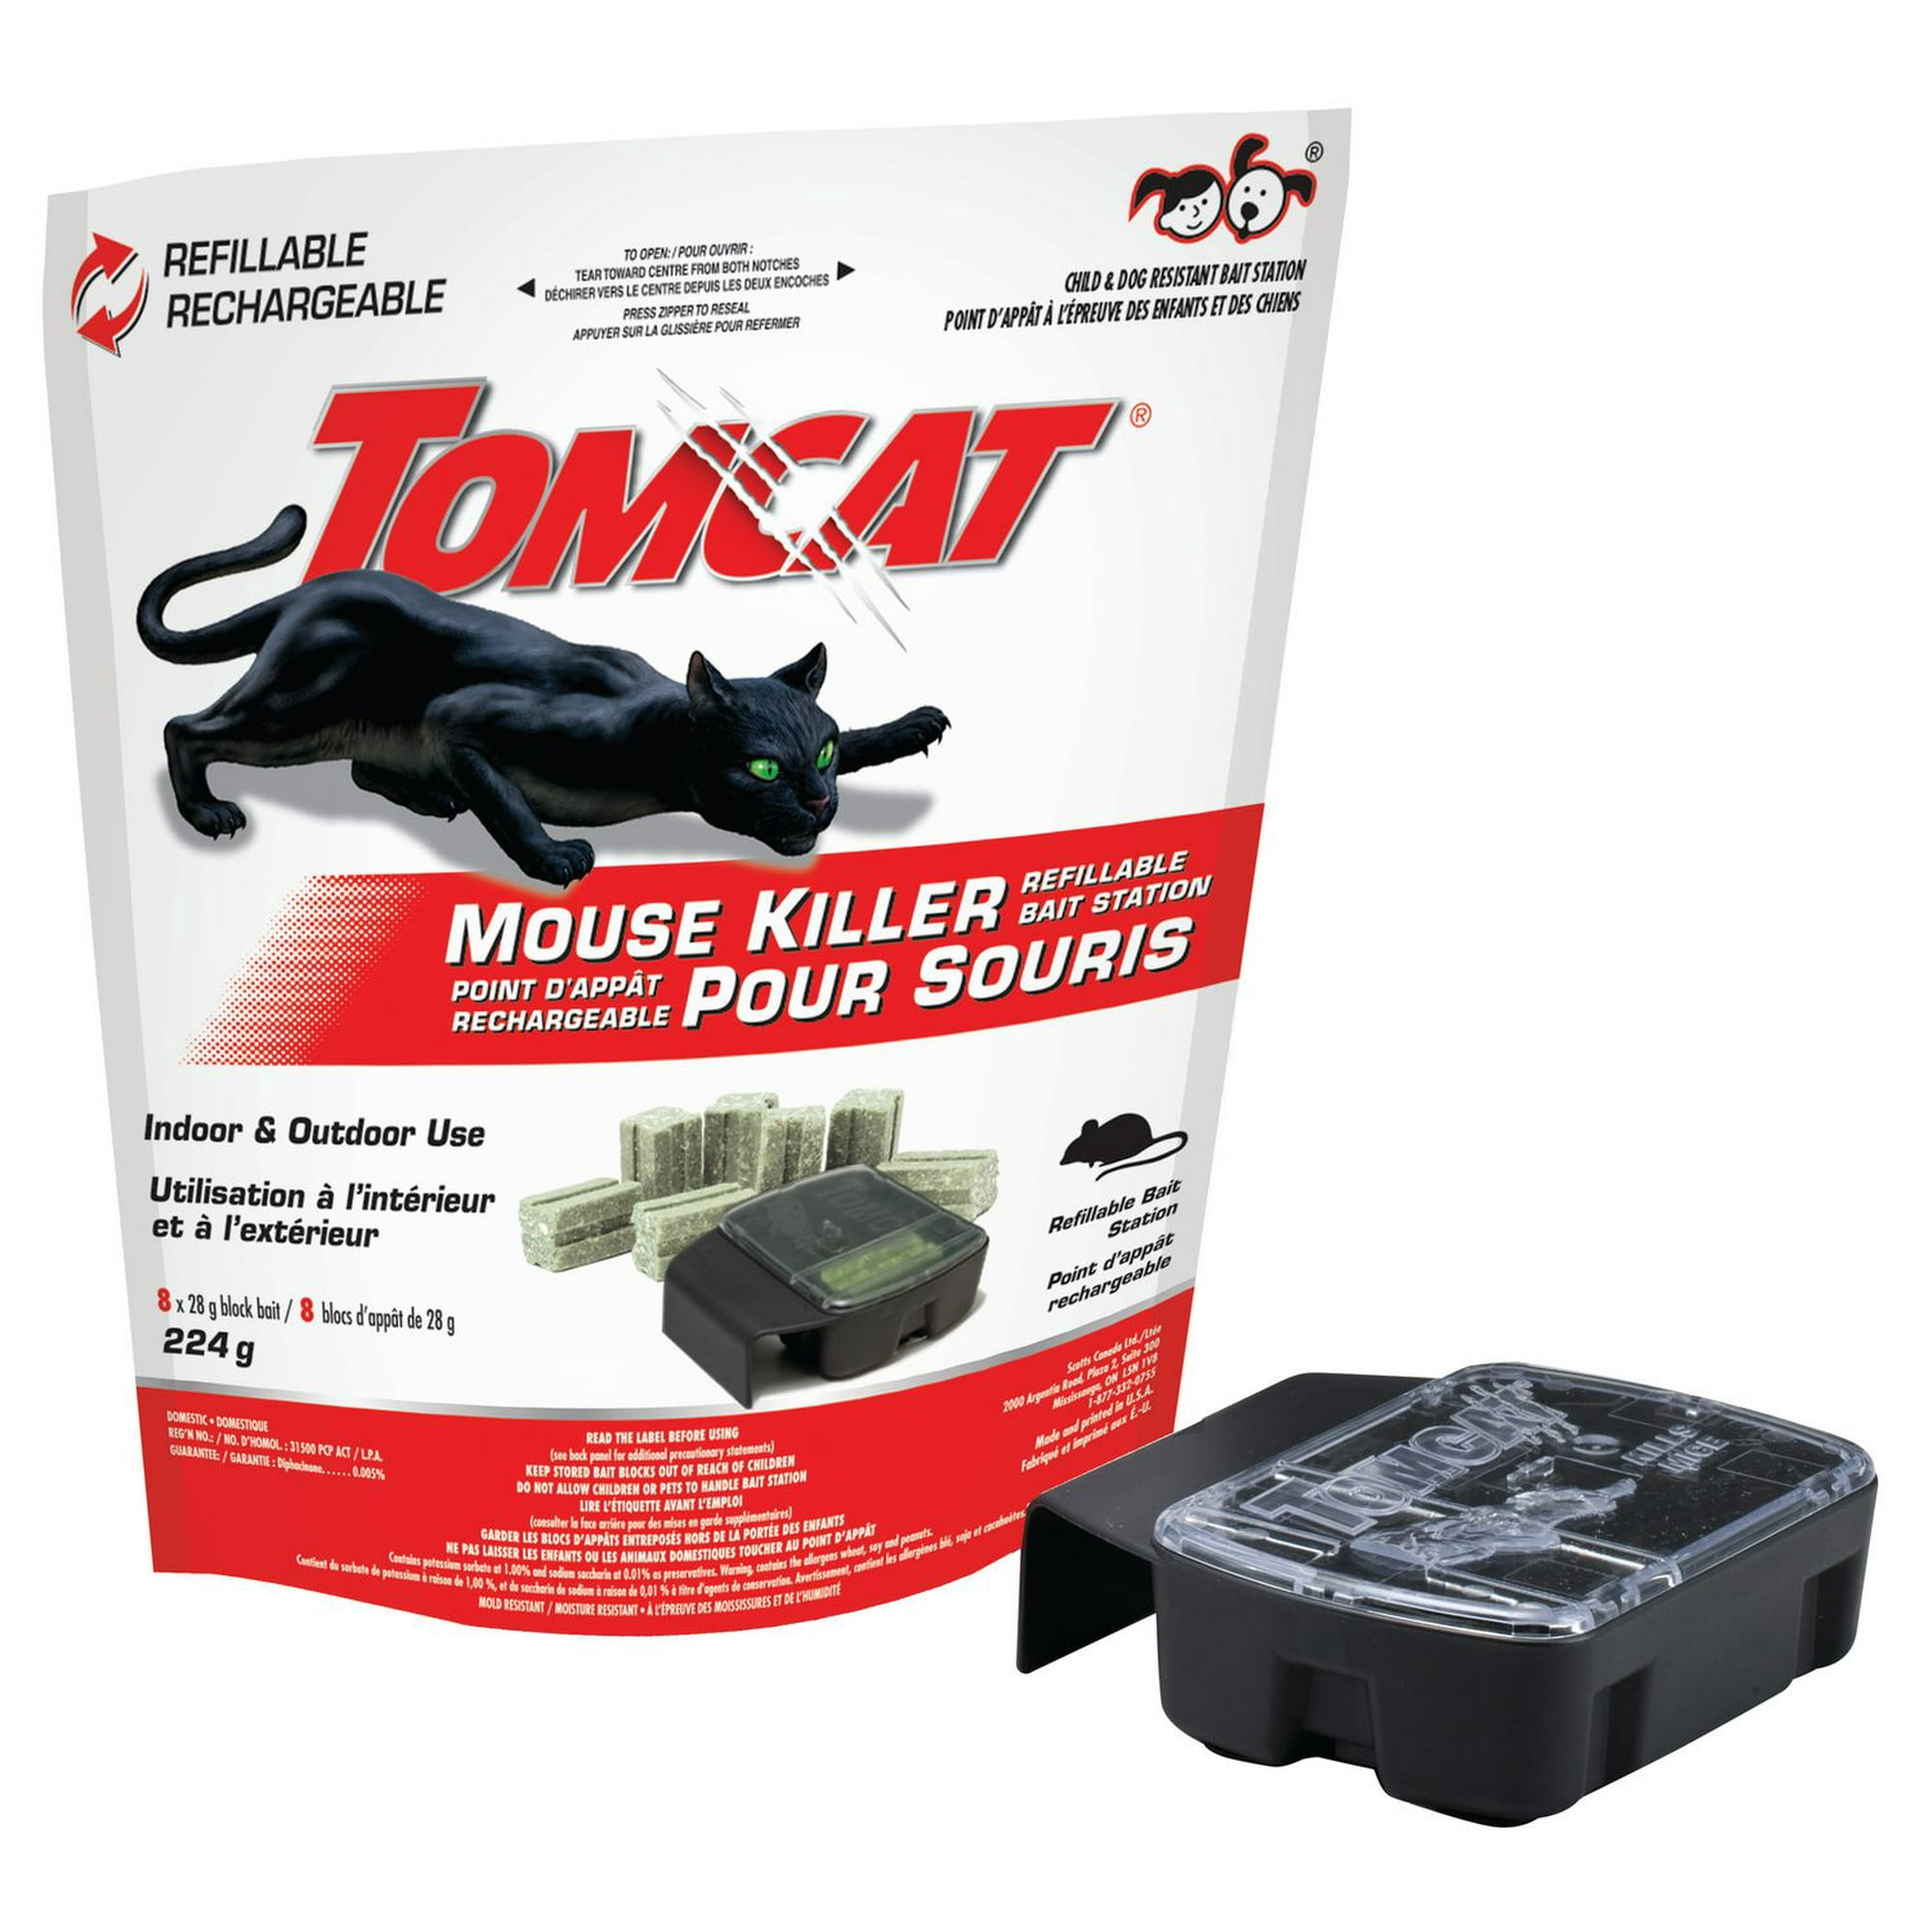 Tomcat Mouse Killer(e) Child Resistant, Refillable Station With 32 0.5-oz.  Refills